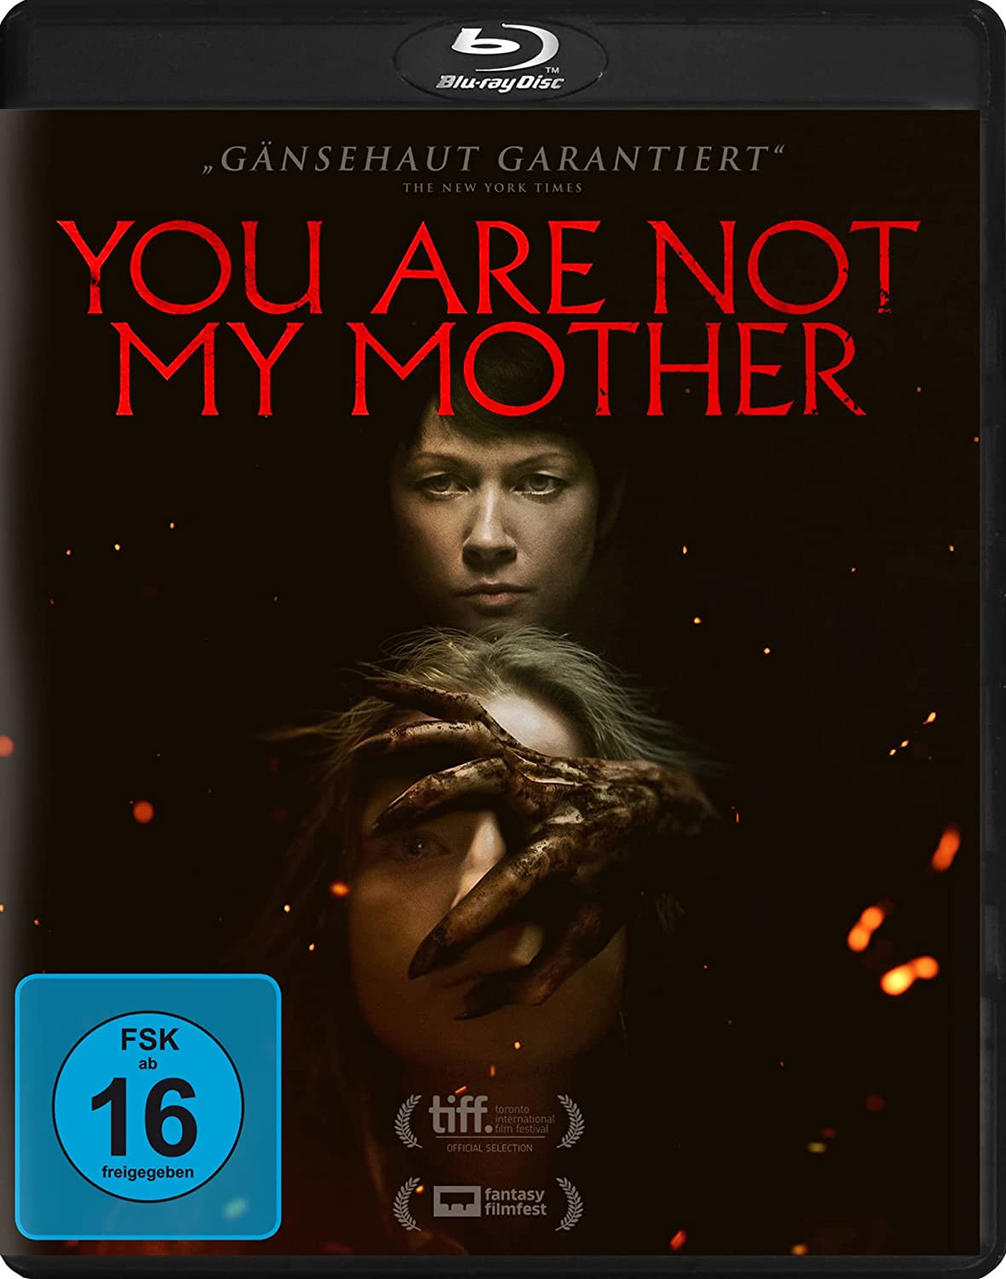 Are Blu-ray My Mother You Not